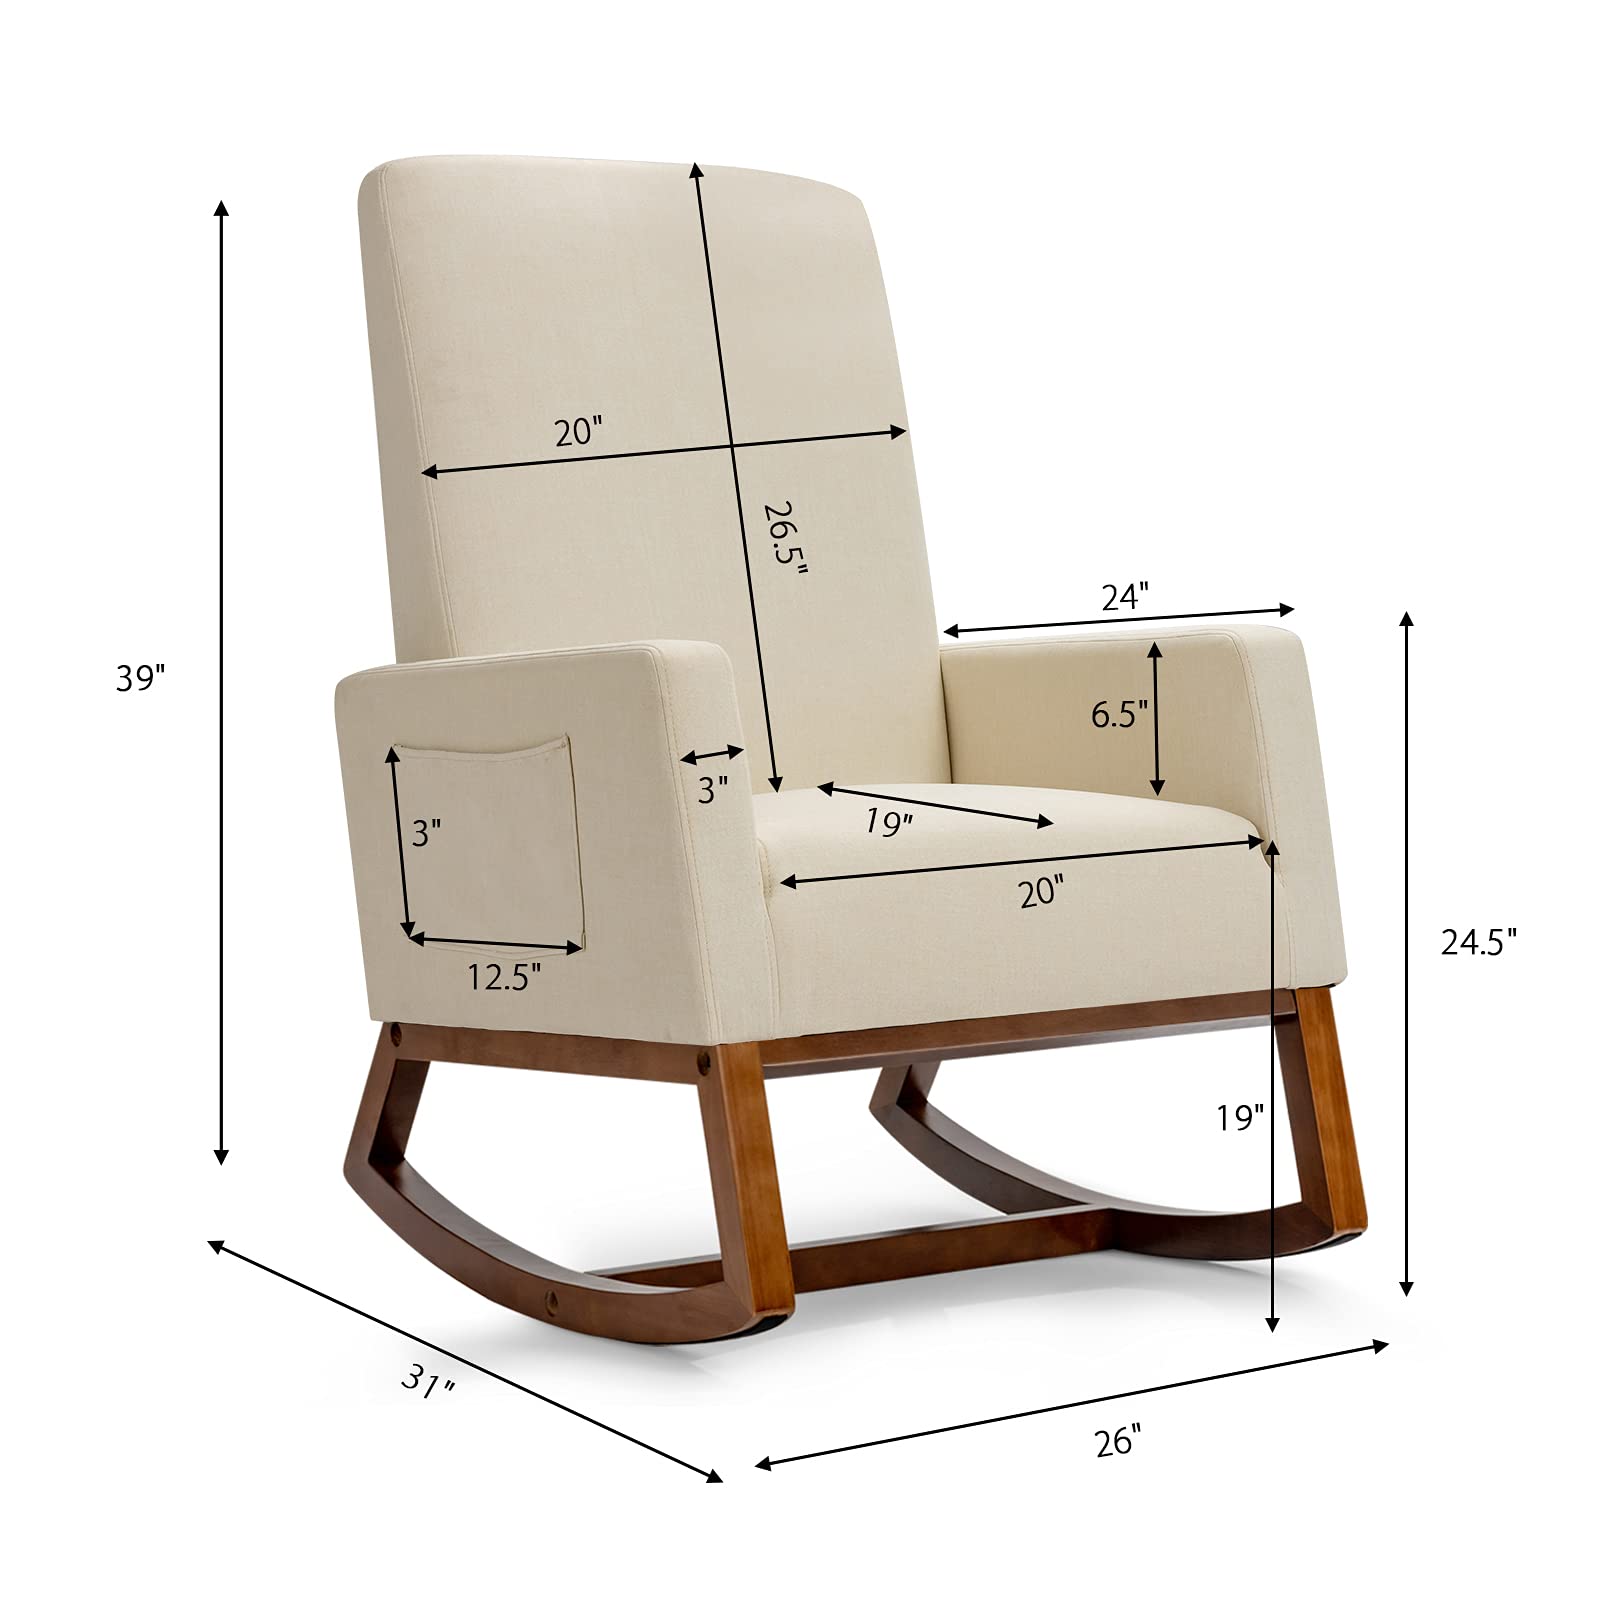 Giantex Rocking Chair Upholstered Living Room Chair